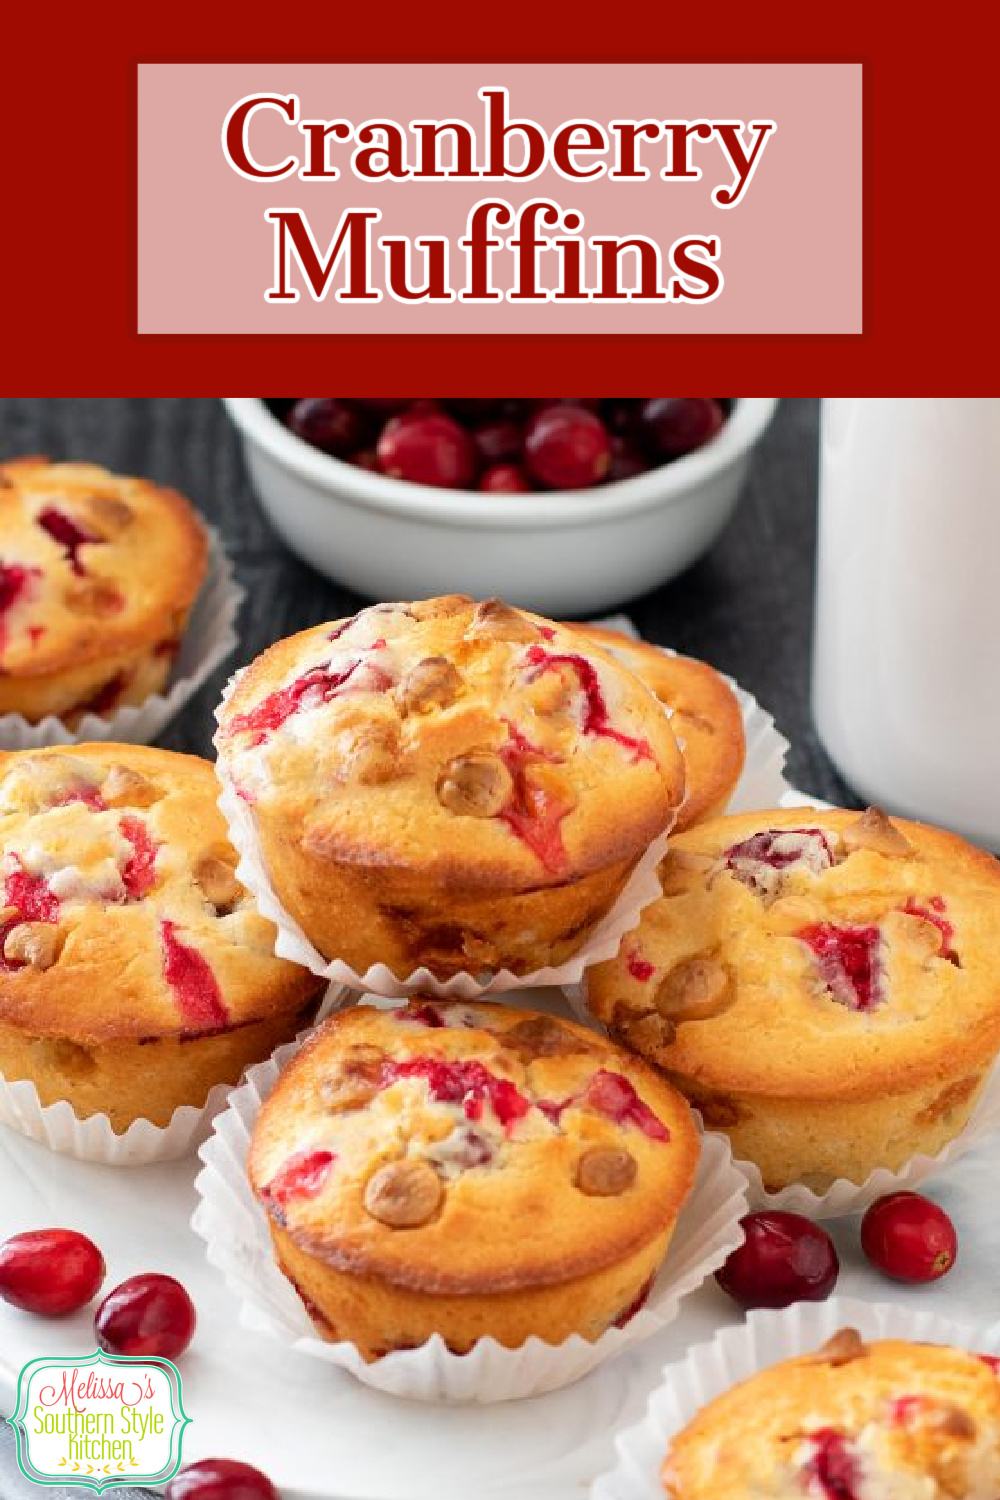 These homemade white chocolate chip Cranberry Muffins are a delicious seasonal option for breakfast, brunch, tea time or dessert #cranberrymuffins #cranberries #whitechocolate #breakfastrecipes #brunchrecipes #easyrecipes #muffinrecipes